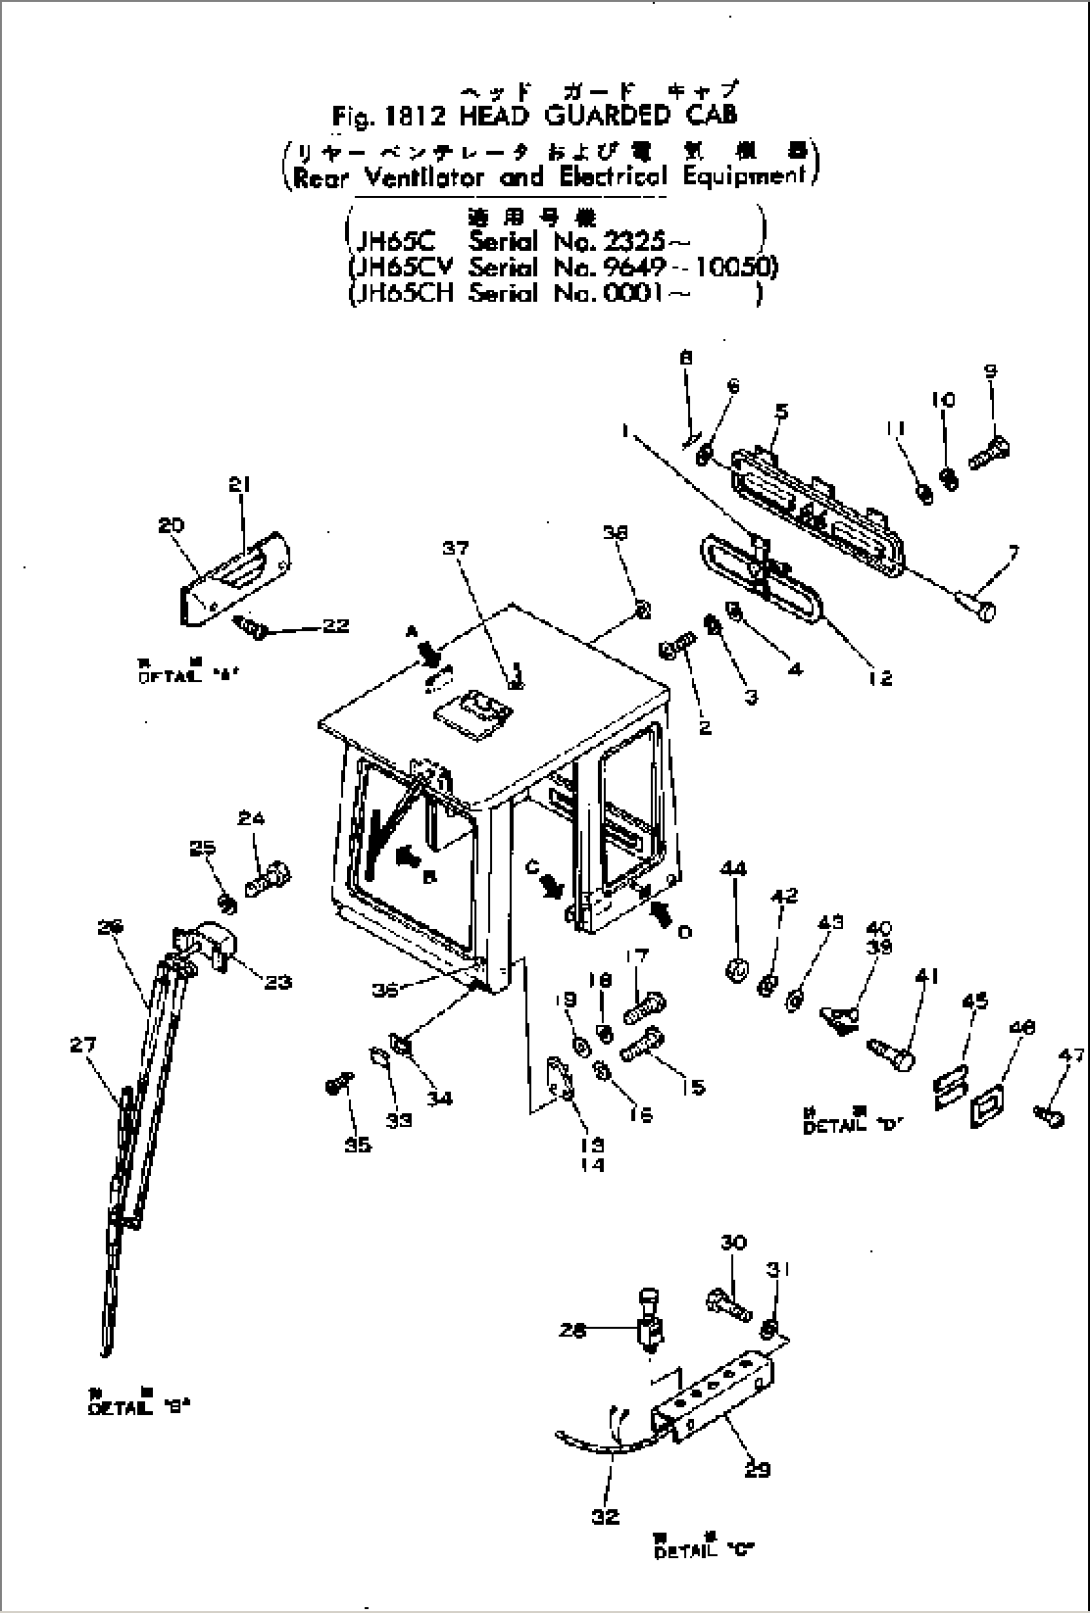 HEAD GUARDED CAB (REAR VENTILATOR AND ELECTRICAL EQUIPMENT)(#3-)